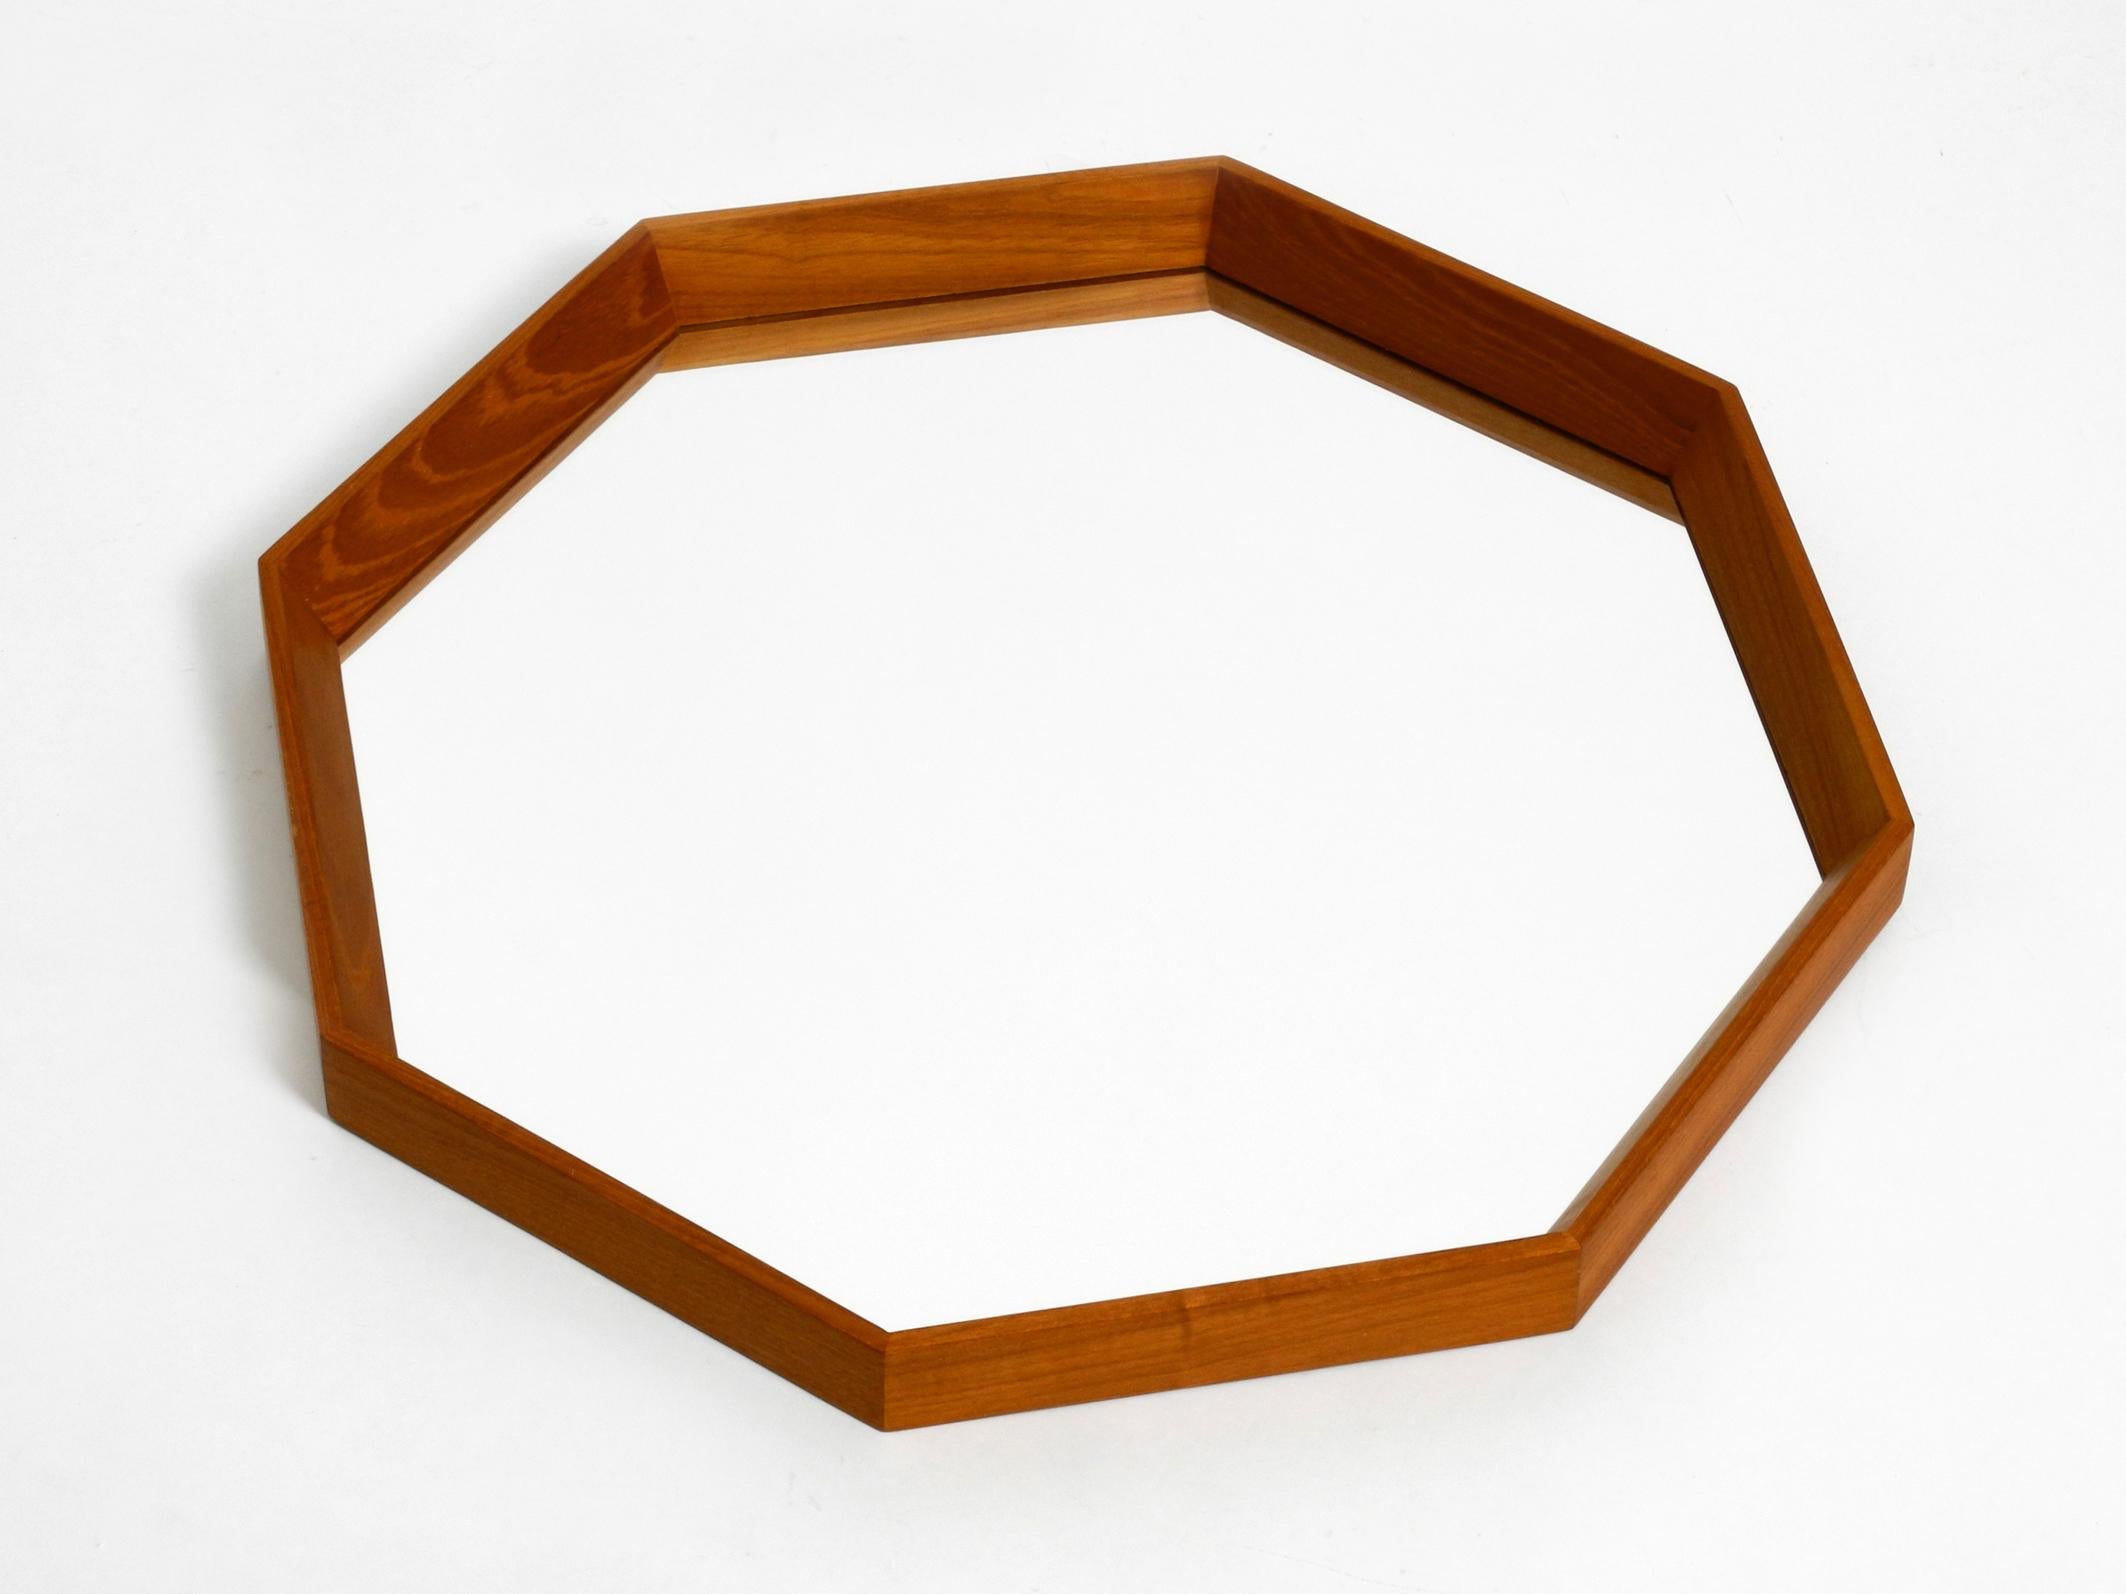 Original 1960s large, beautiful wall mirror with a wide octagonal teak frame.
Most likely from a Scandinavian production.
Very high quality workmanship in a minimalist design.
100% original and in a very good vintage condition.
Glass and wooden